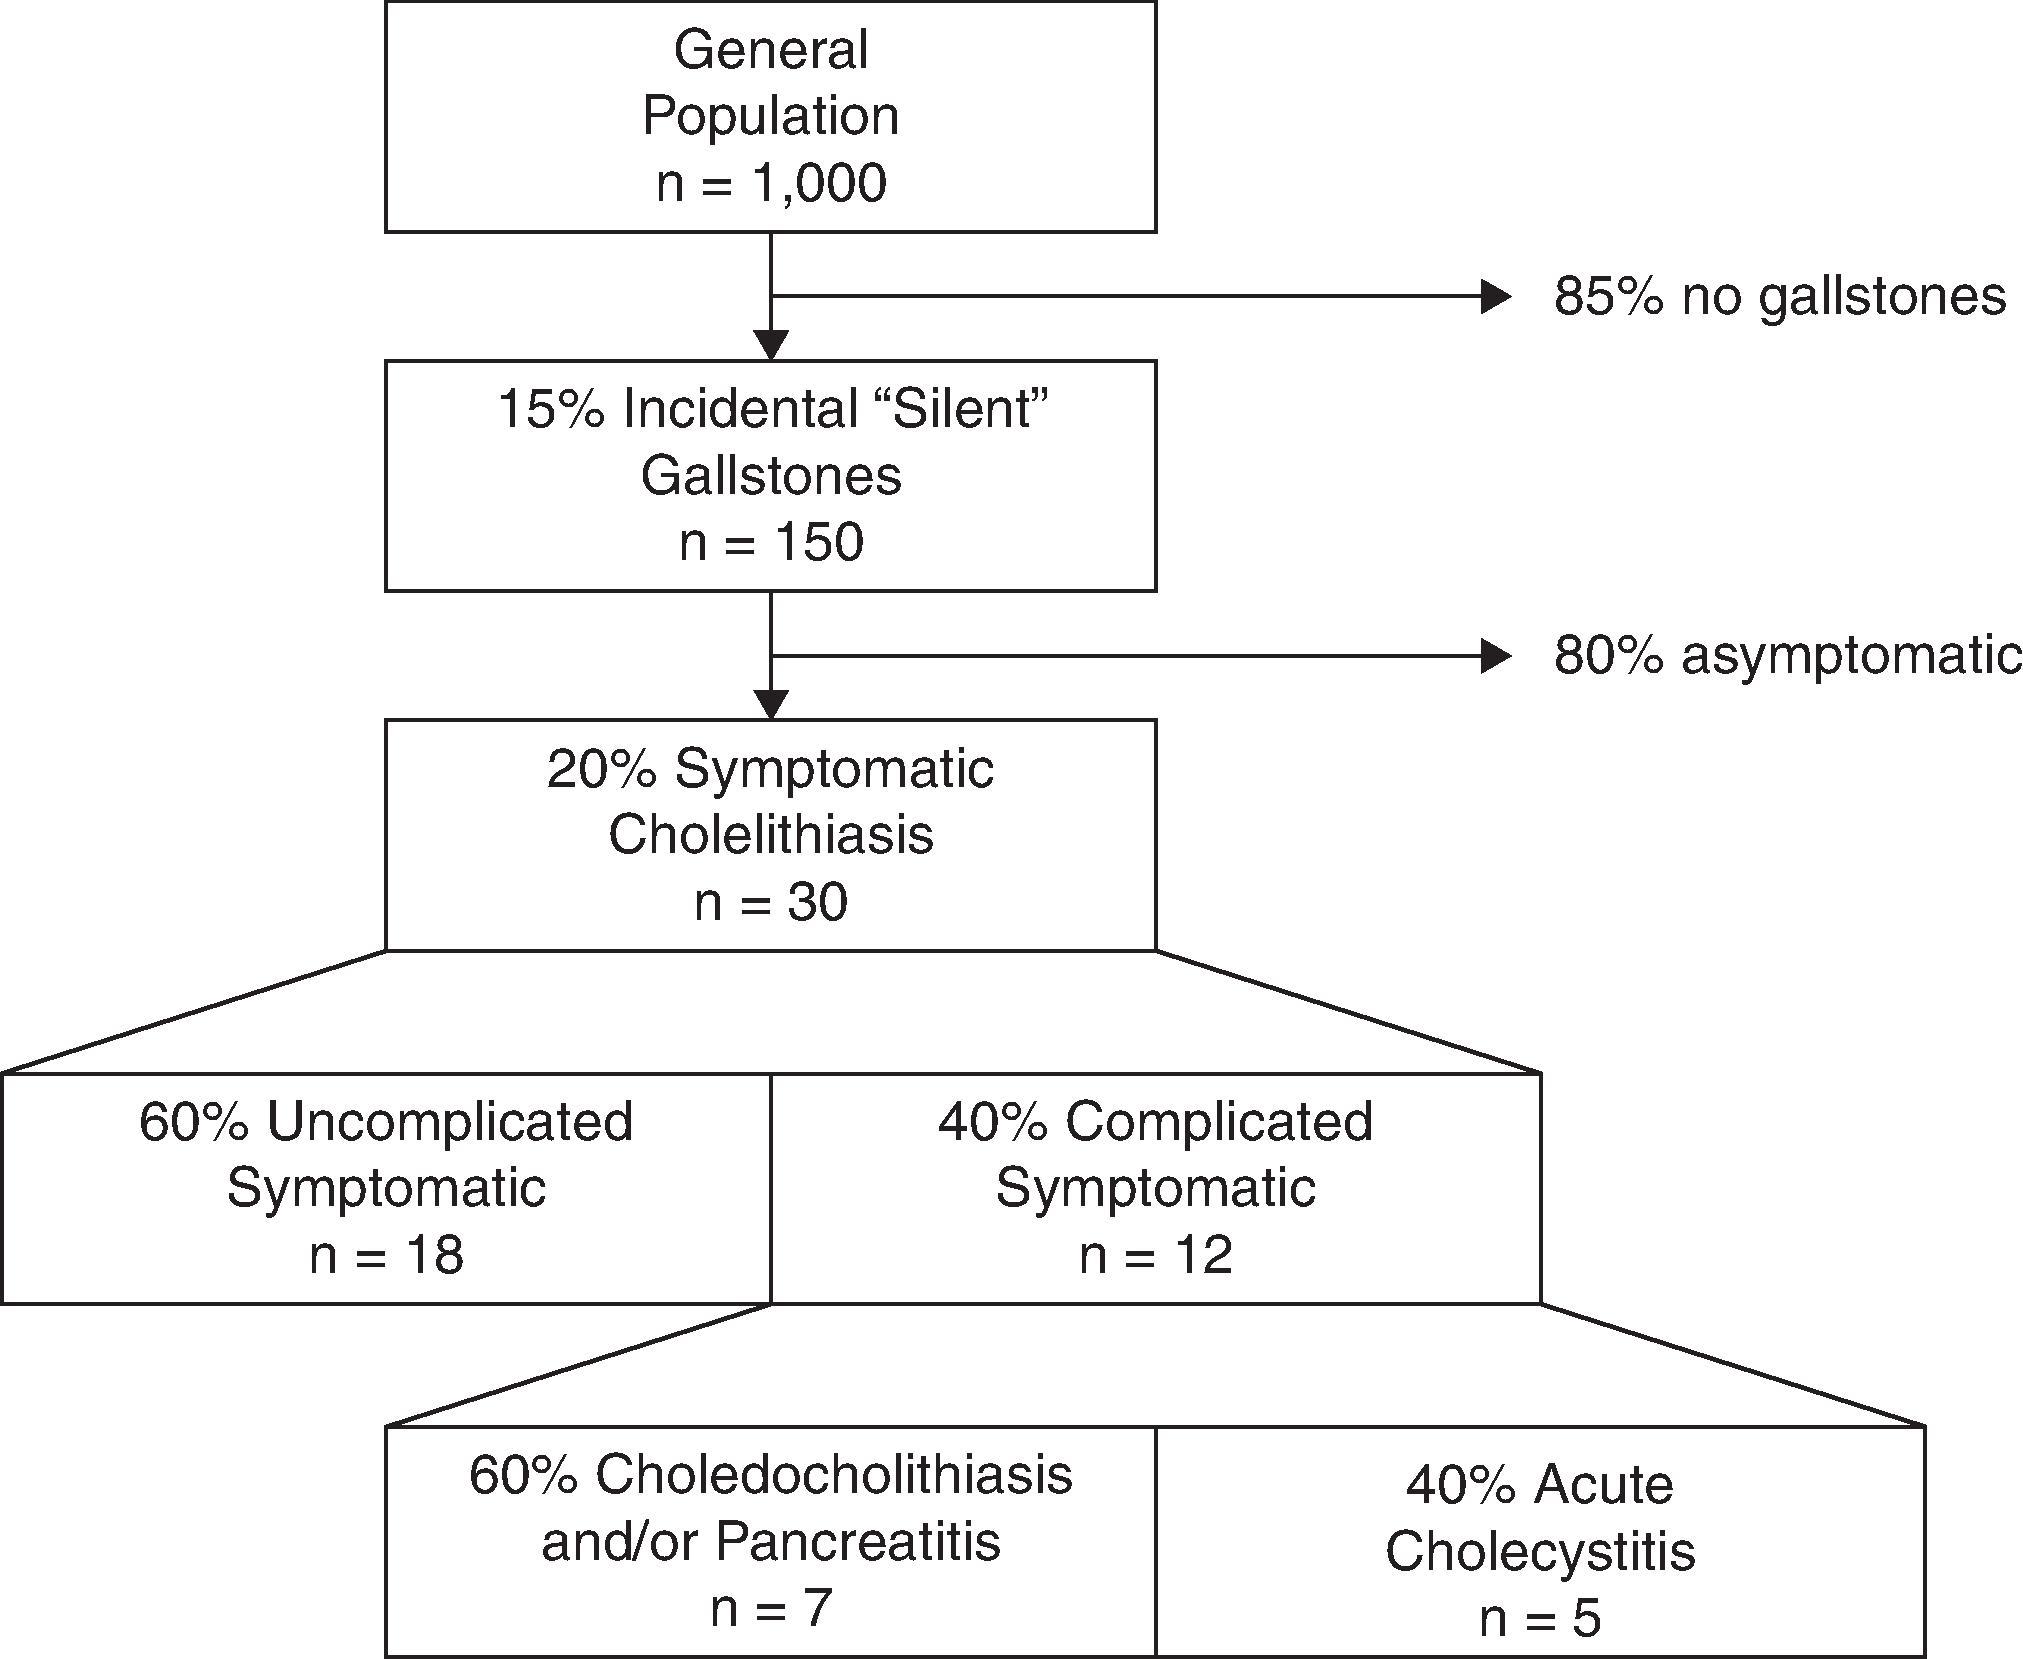 FIG. 1, Flowchart demonstrating the incidence of silent gallstones, symptomatic cholelithiasis, and complicated gallstone disease in an illustrative group of 1000 adults representative of the general population.